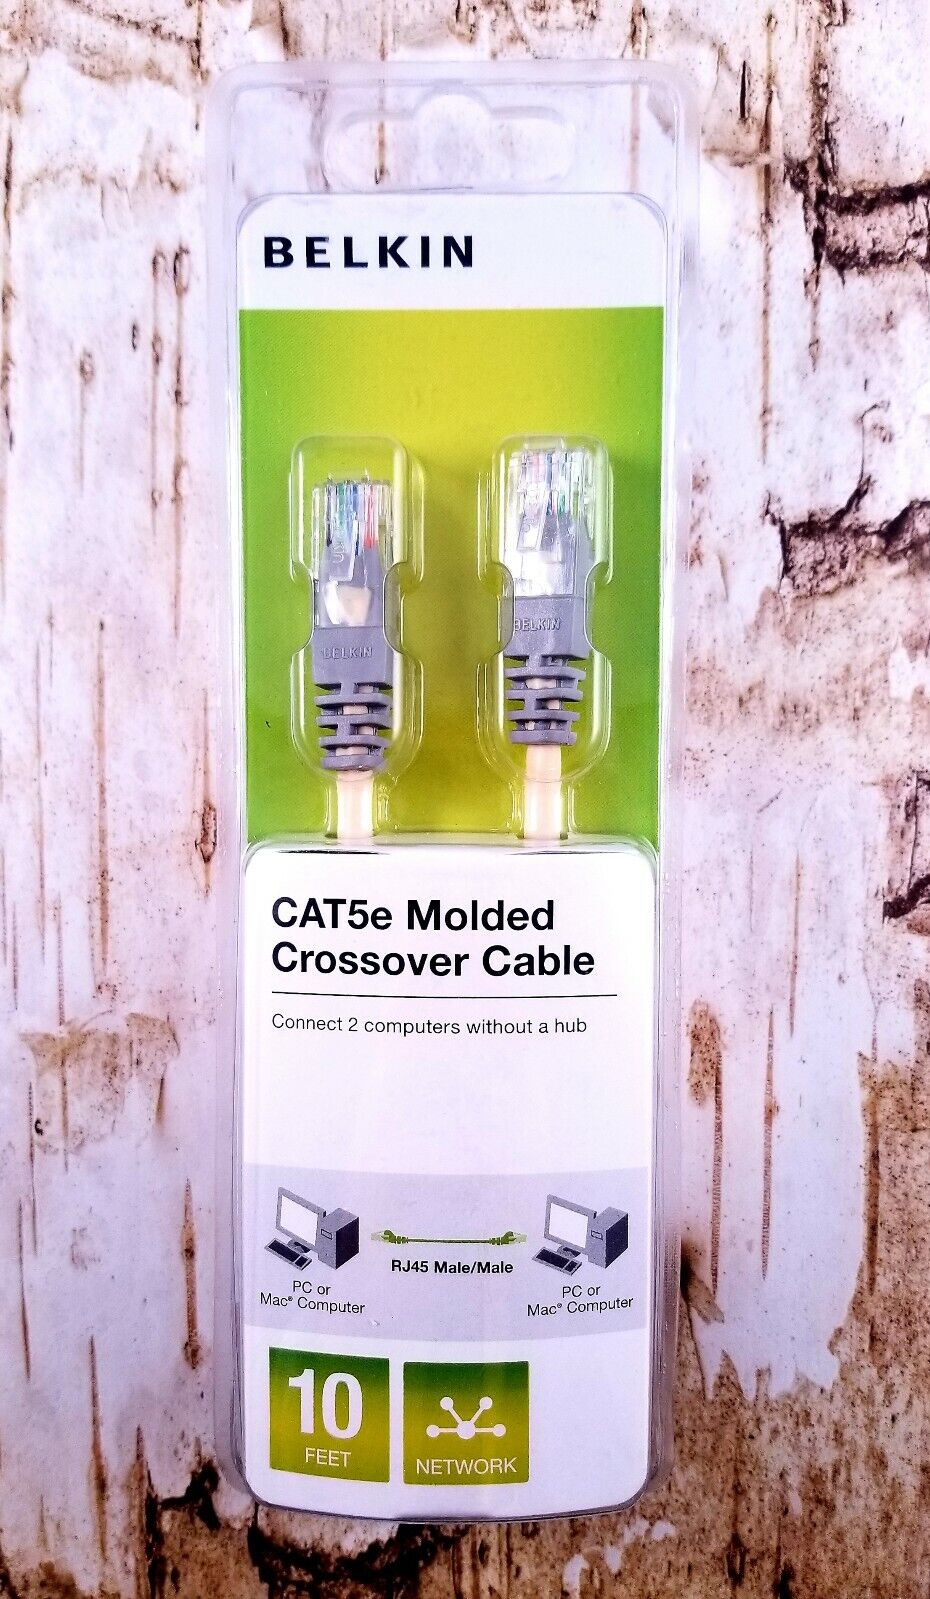 Belkin Cat5e Molded Crossover Cable RJ45 Male Network 10 Ft Beige New 